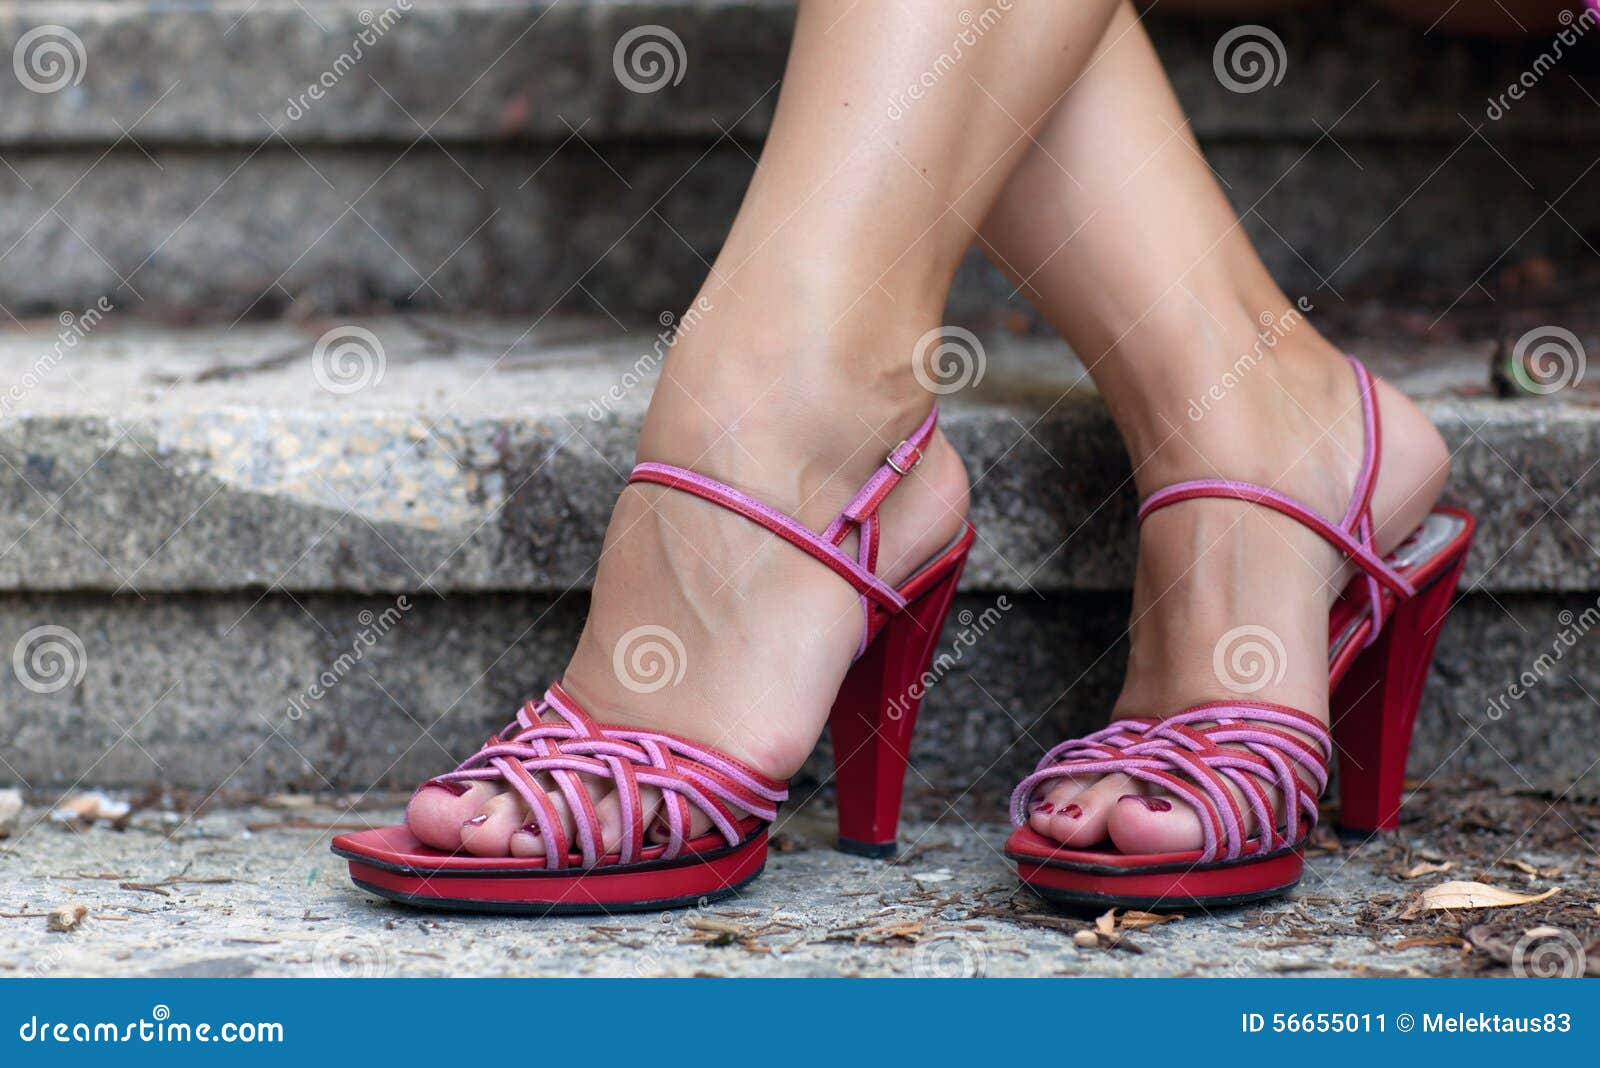 Close-up of woman's feet with high heels … – Buy image – 10315709 ❘